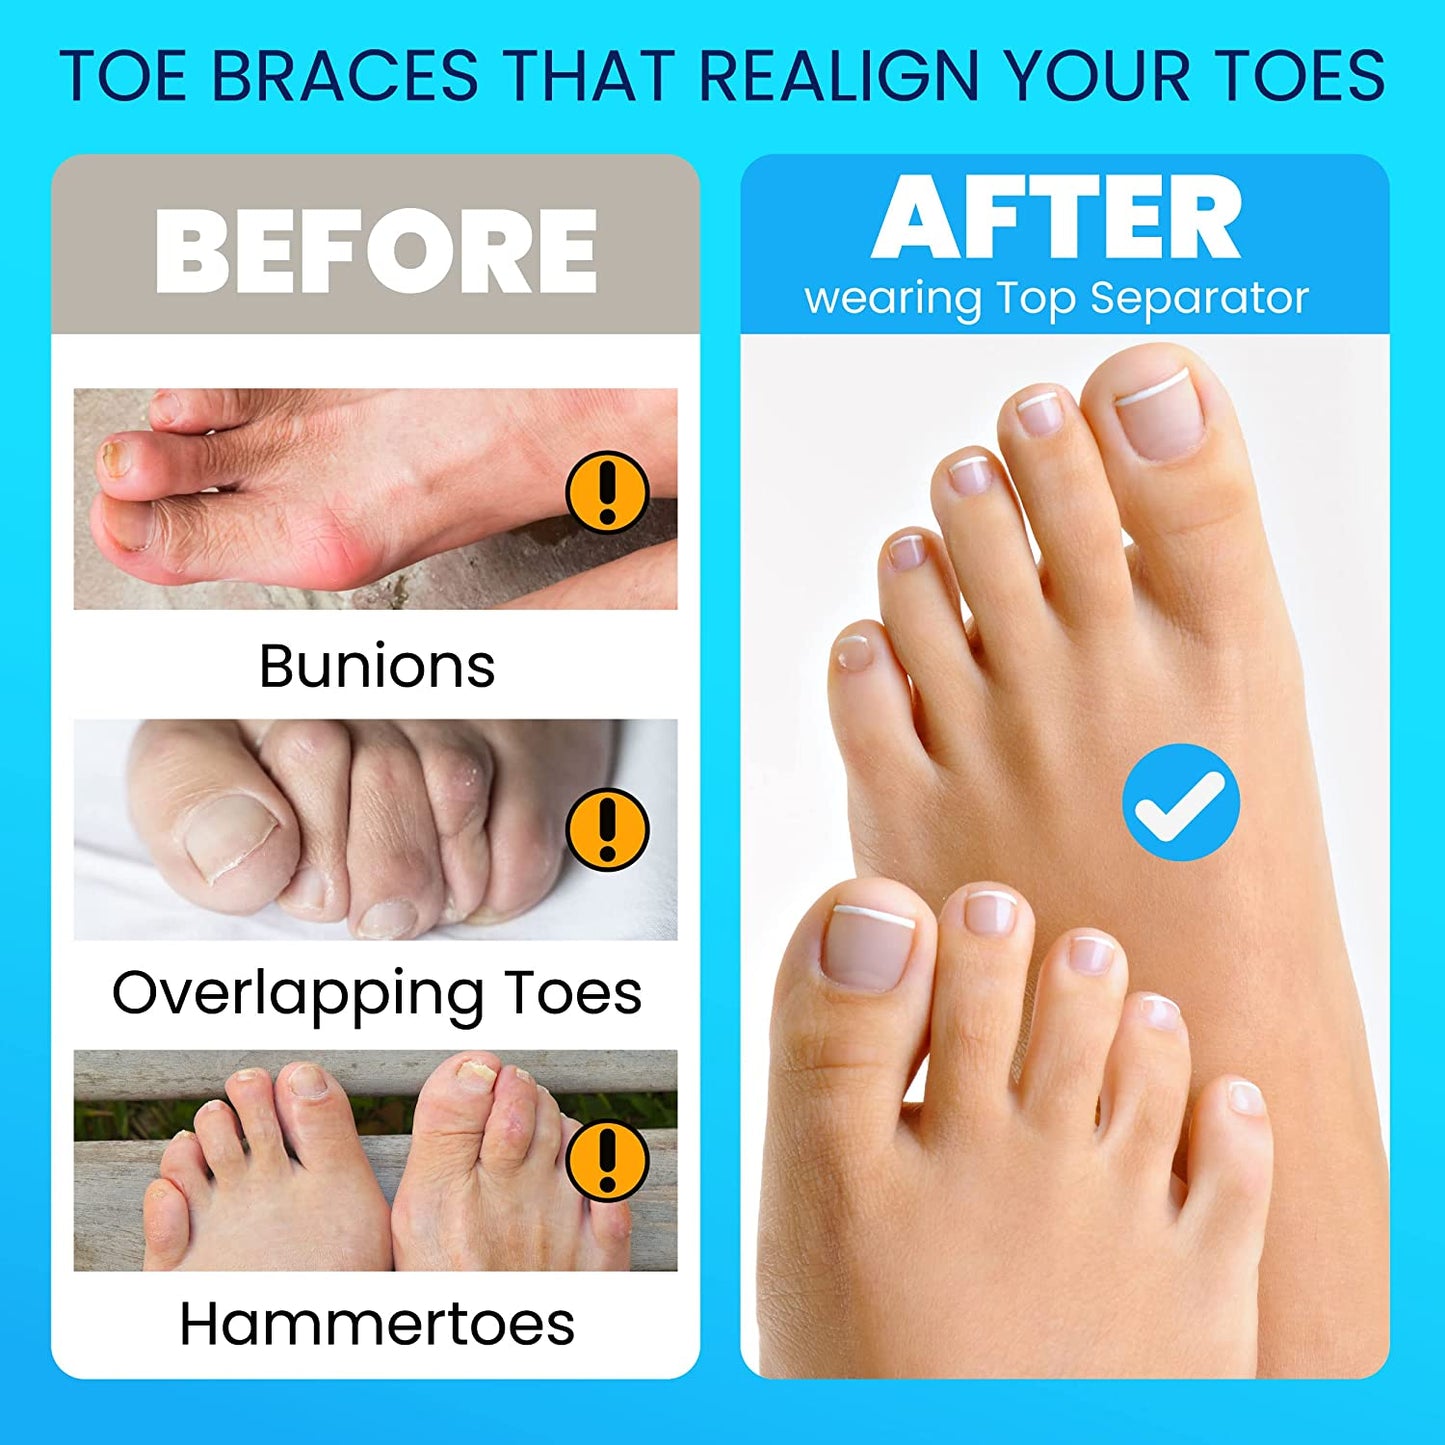 New Toe Separator Toe Spacers for Feet – 2 Pairs Premium Bunion Corrector for Women & Men, Hammer Toe Straightener, Comfortable and Durable Toe Separators for Overlapping Toes